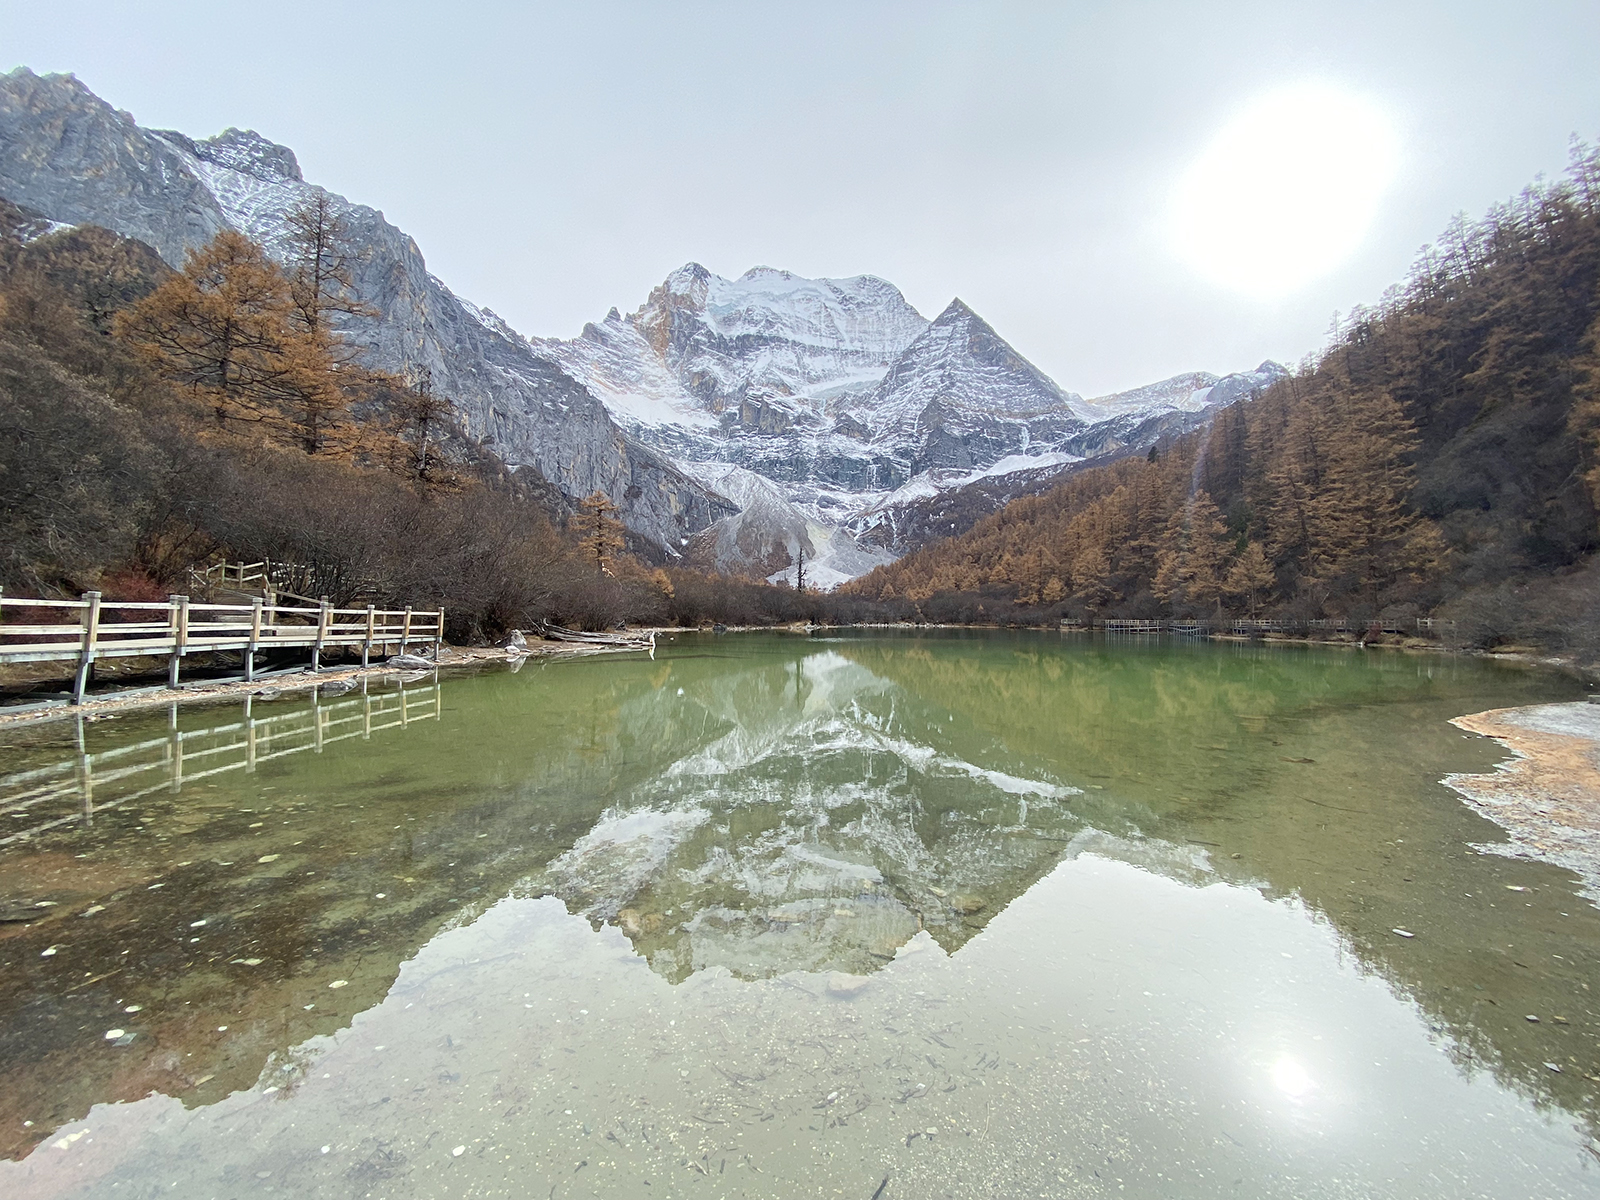 At 6,032 meters, Xiannairi is the highest peak of the three sacred snow-capped mountains at Daocheng Yading Nature Reserve, where its inverted reflection is seen in the waters of Zhuoma La Lake in Ganzi, Sichuan. /CGTN